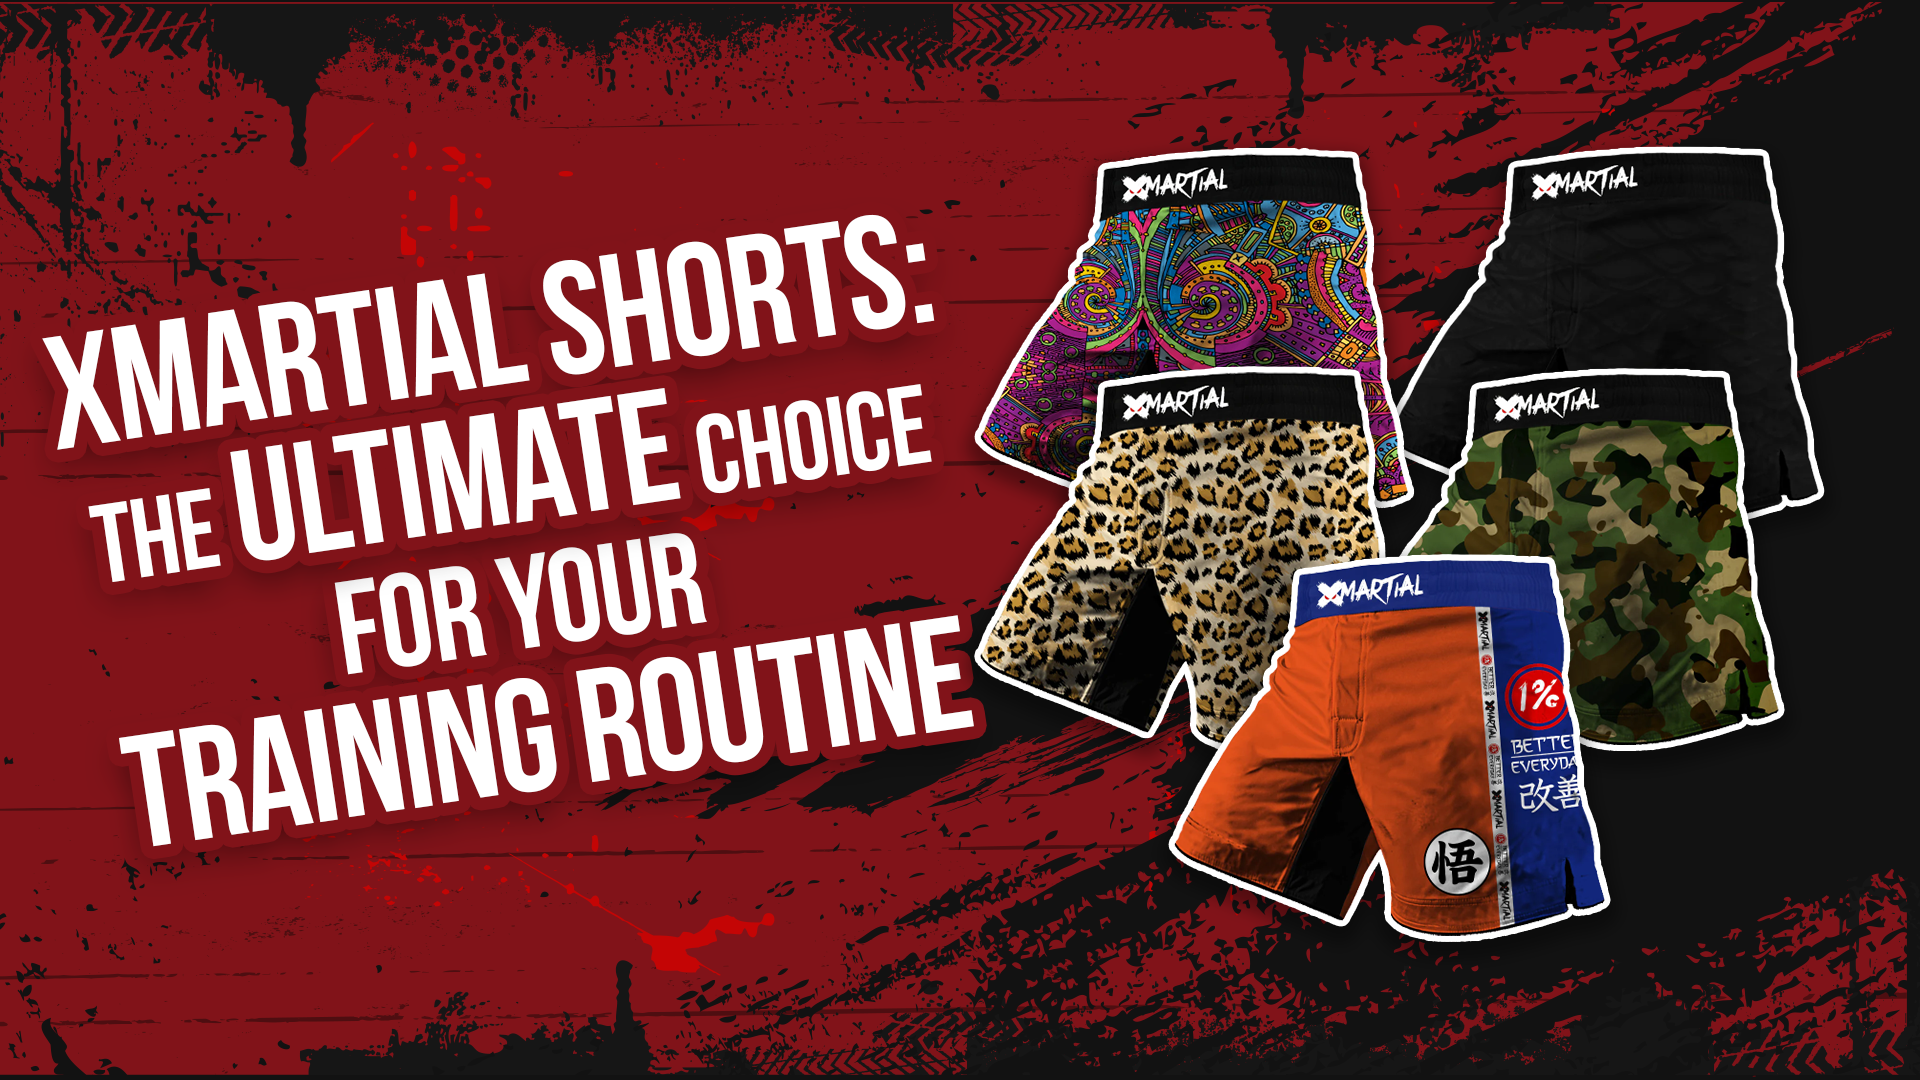 XMartial Shorts: The Ultimate Choice for Your Training Routine